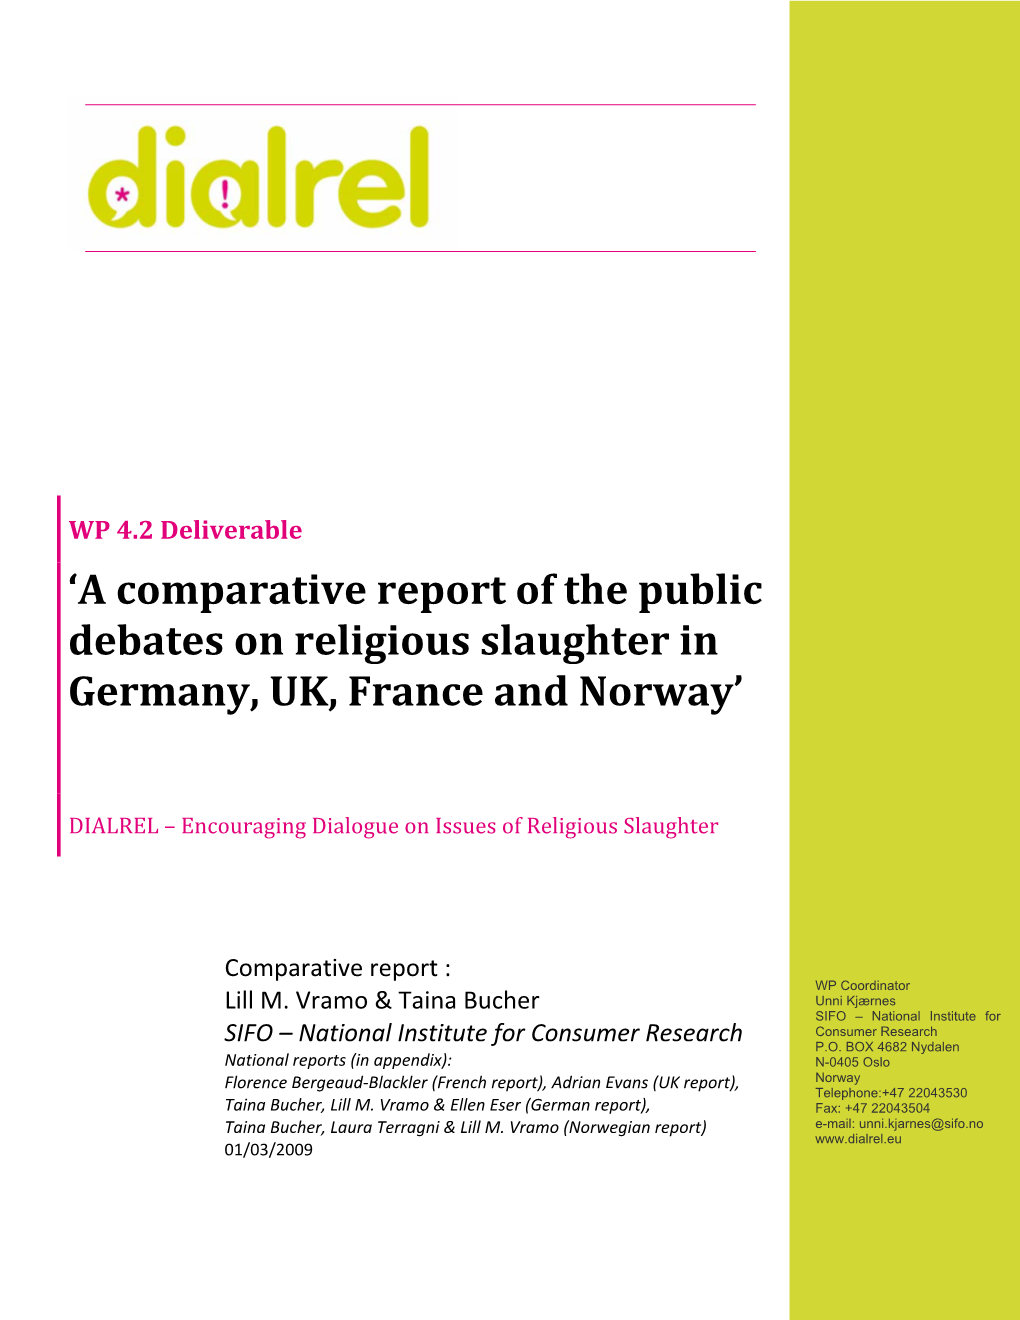 Able ‘A Comparative Report of the Public Debates on Religious Slaughter in Germany, UK, France and Norway’